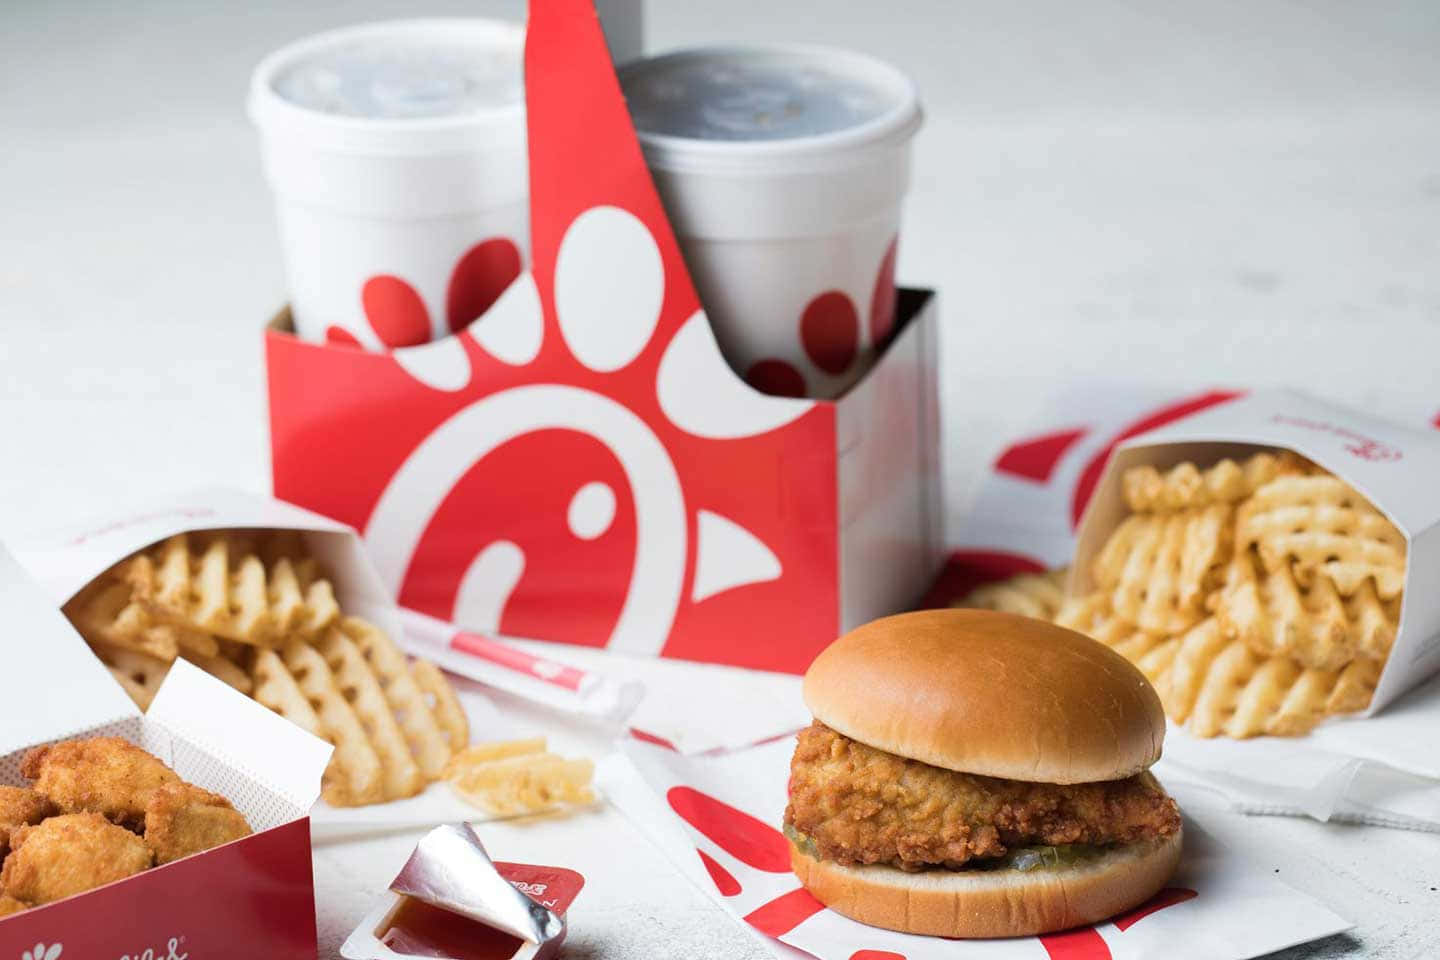 Enjoy our delicious Chick Fil A!